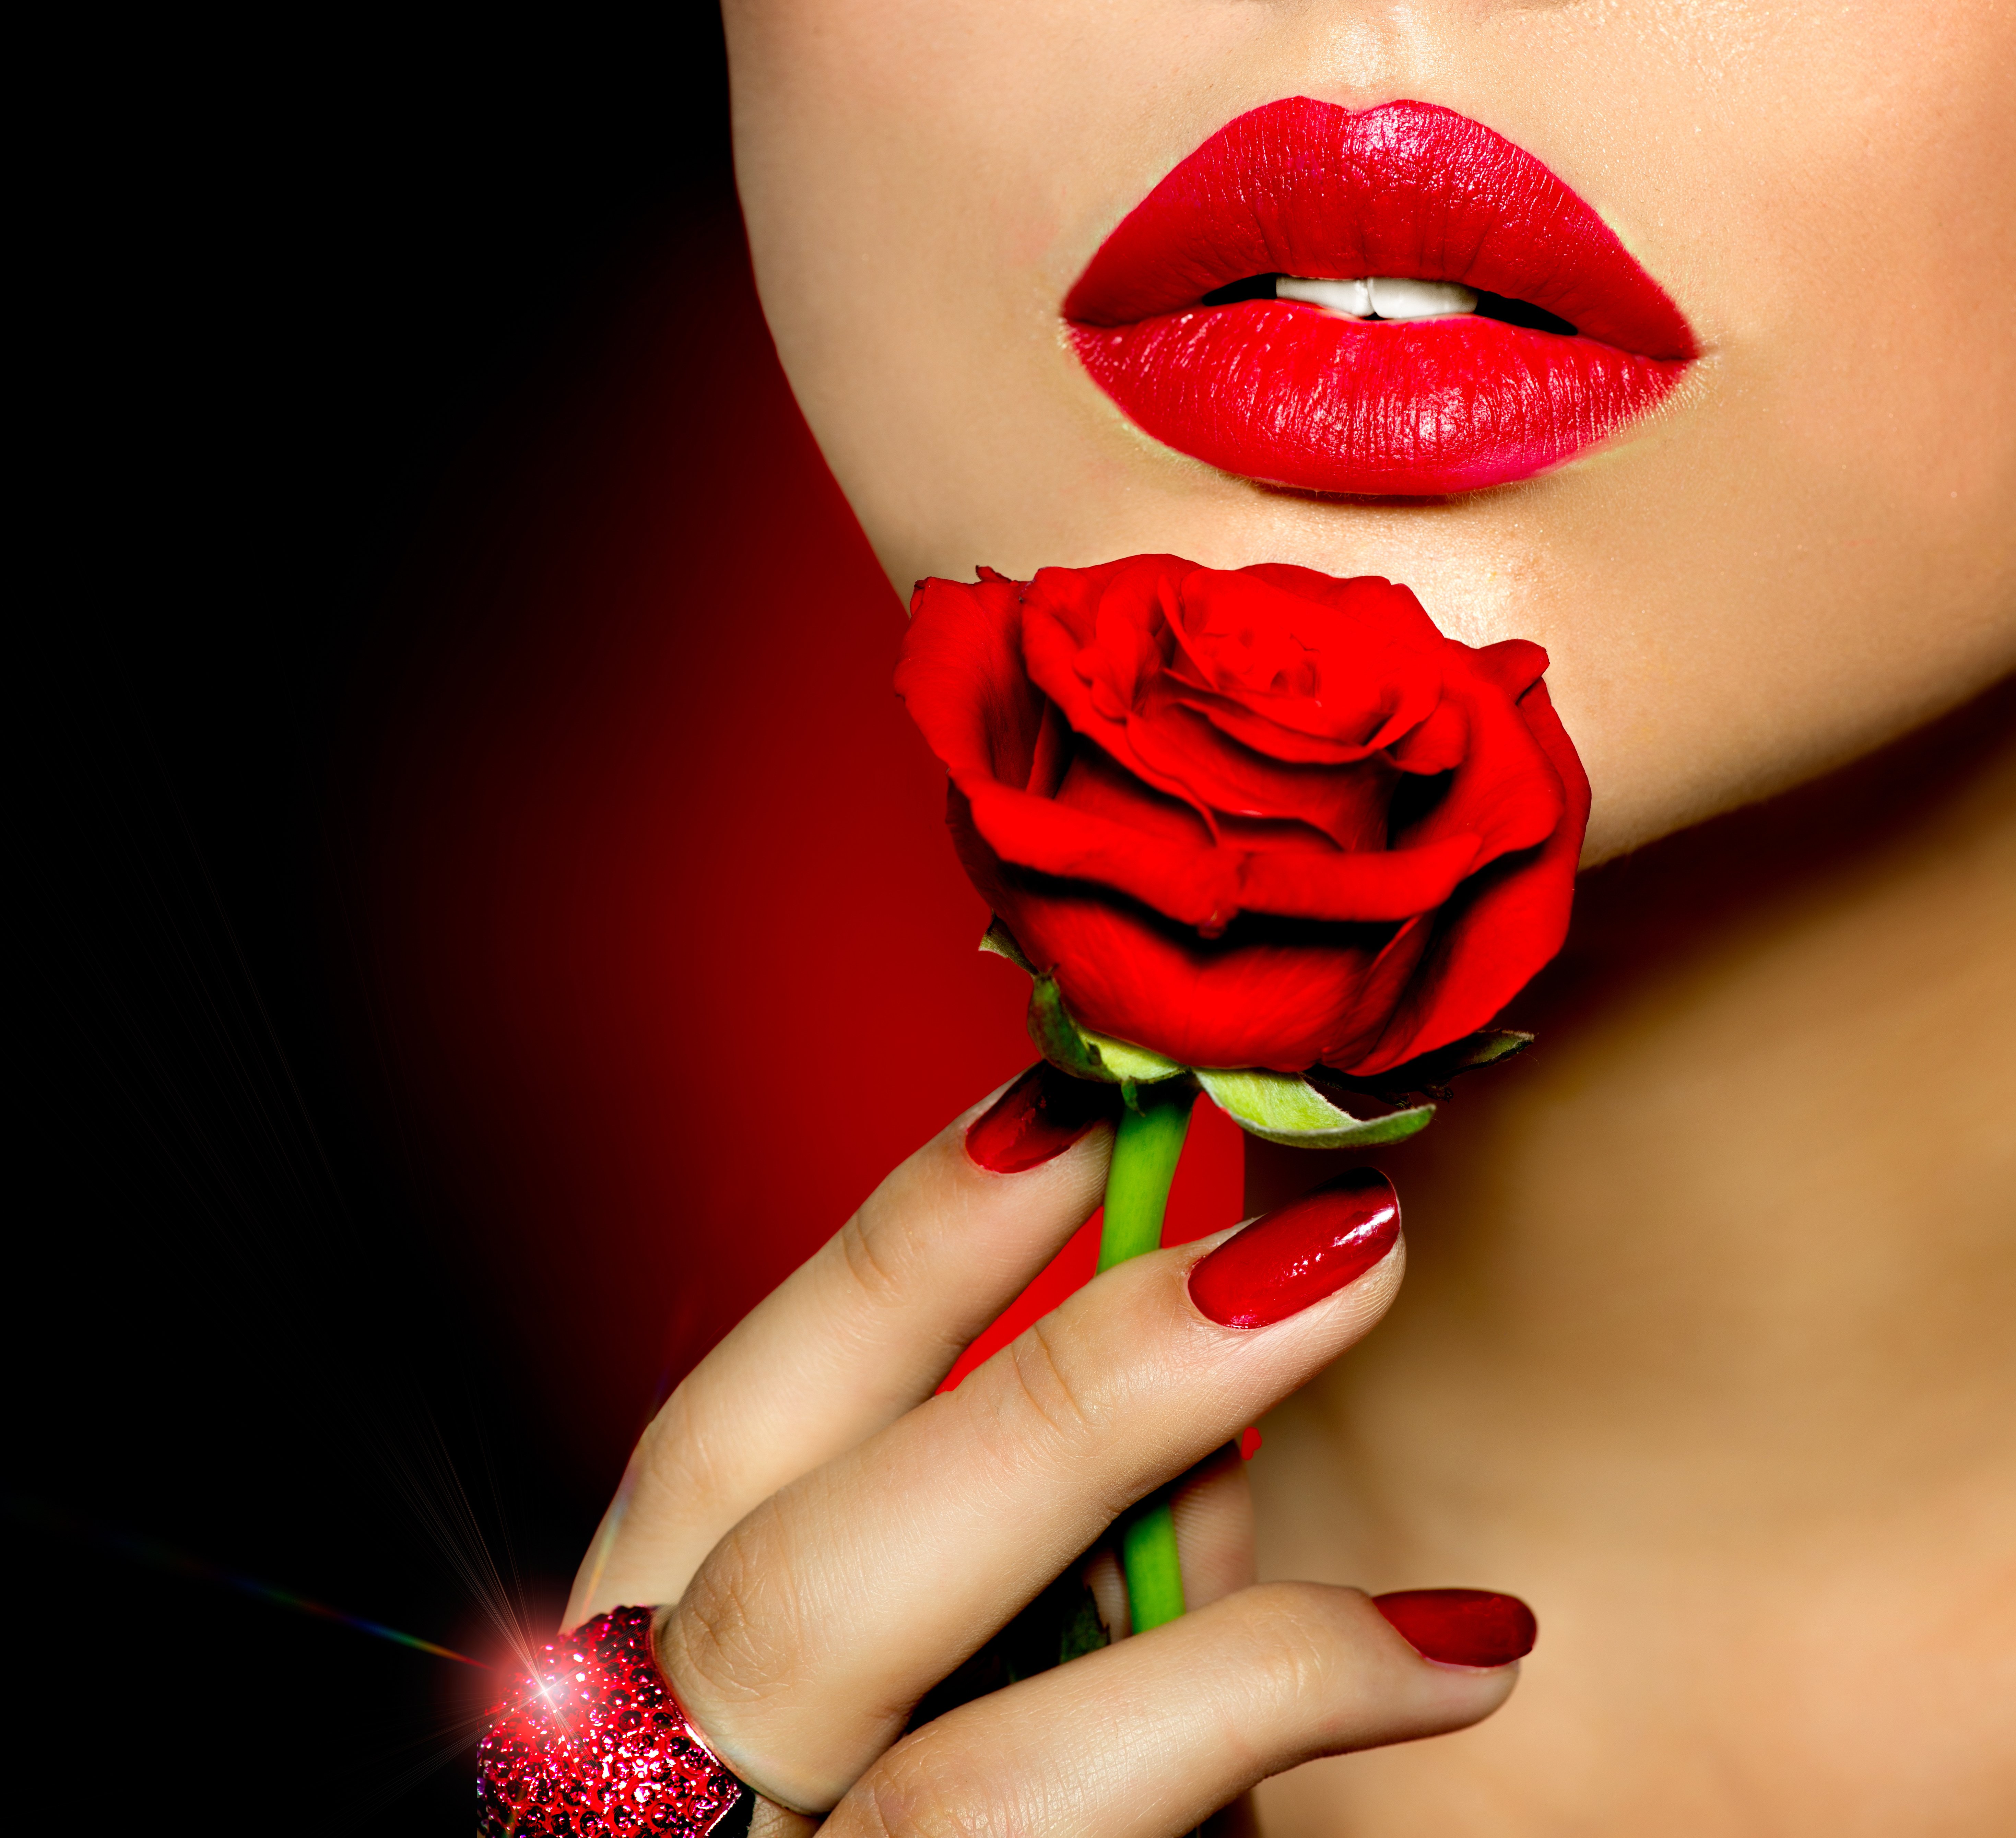 spettacular, Lips, Rose, One, Beauty, Lovely, Passion, Red, Lips, Nail, Love, Women, Red, Roses Wallpaper